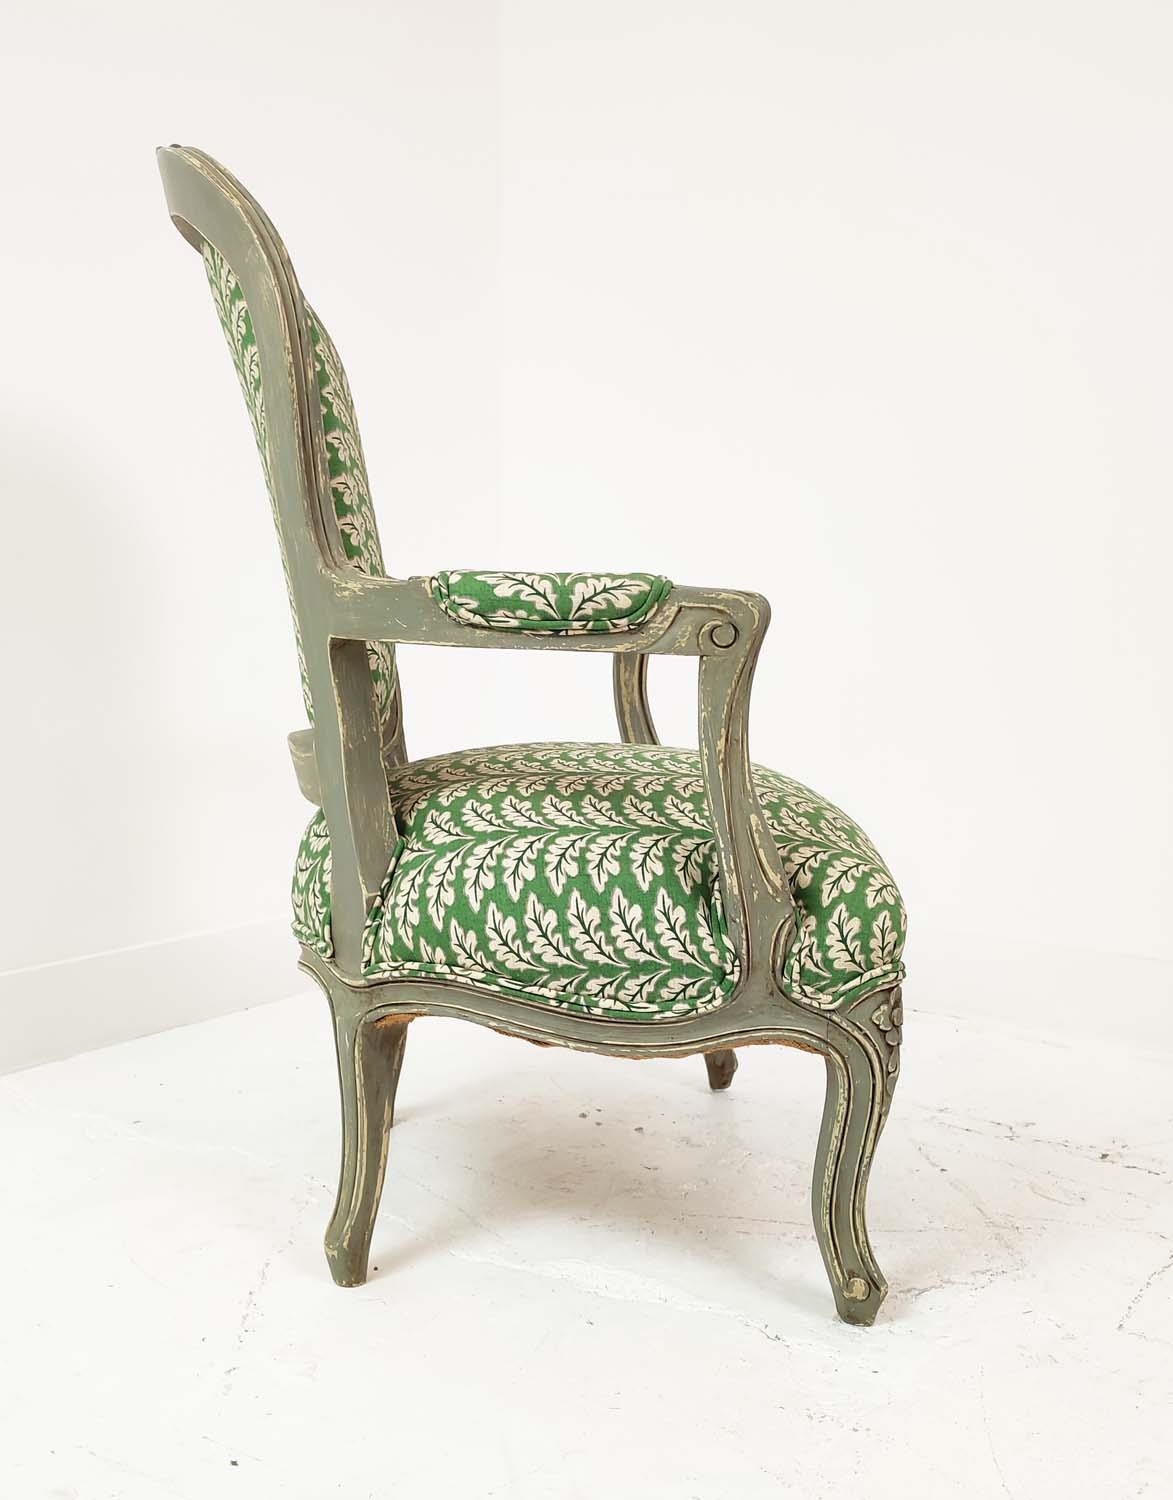 FAUTEUILS, a pair, Louis XV style, grey painted with green leaf patterned upholstery, 92cm H x - Image 7 of 8